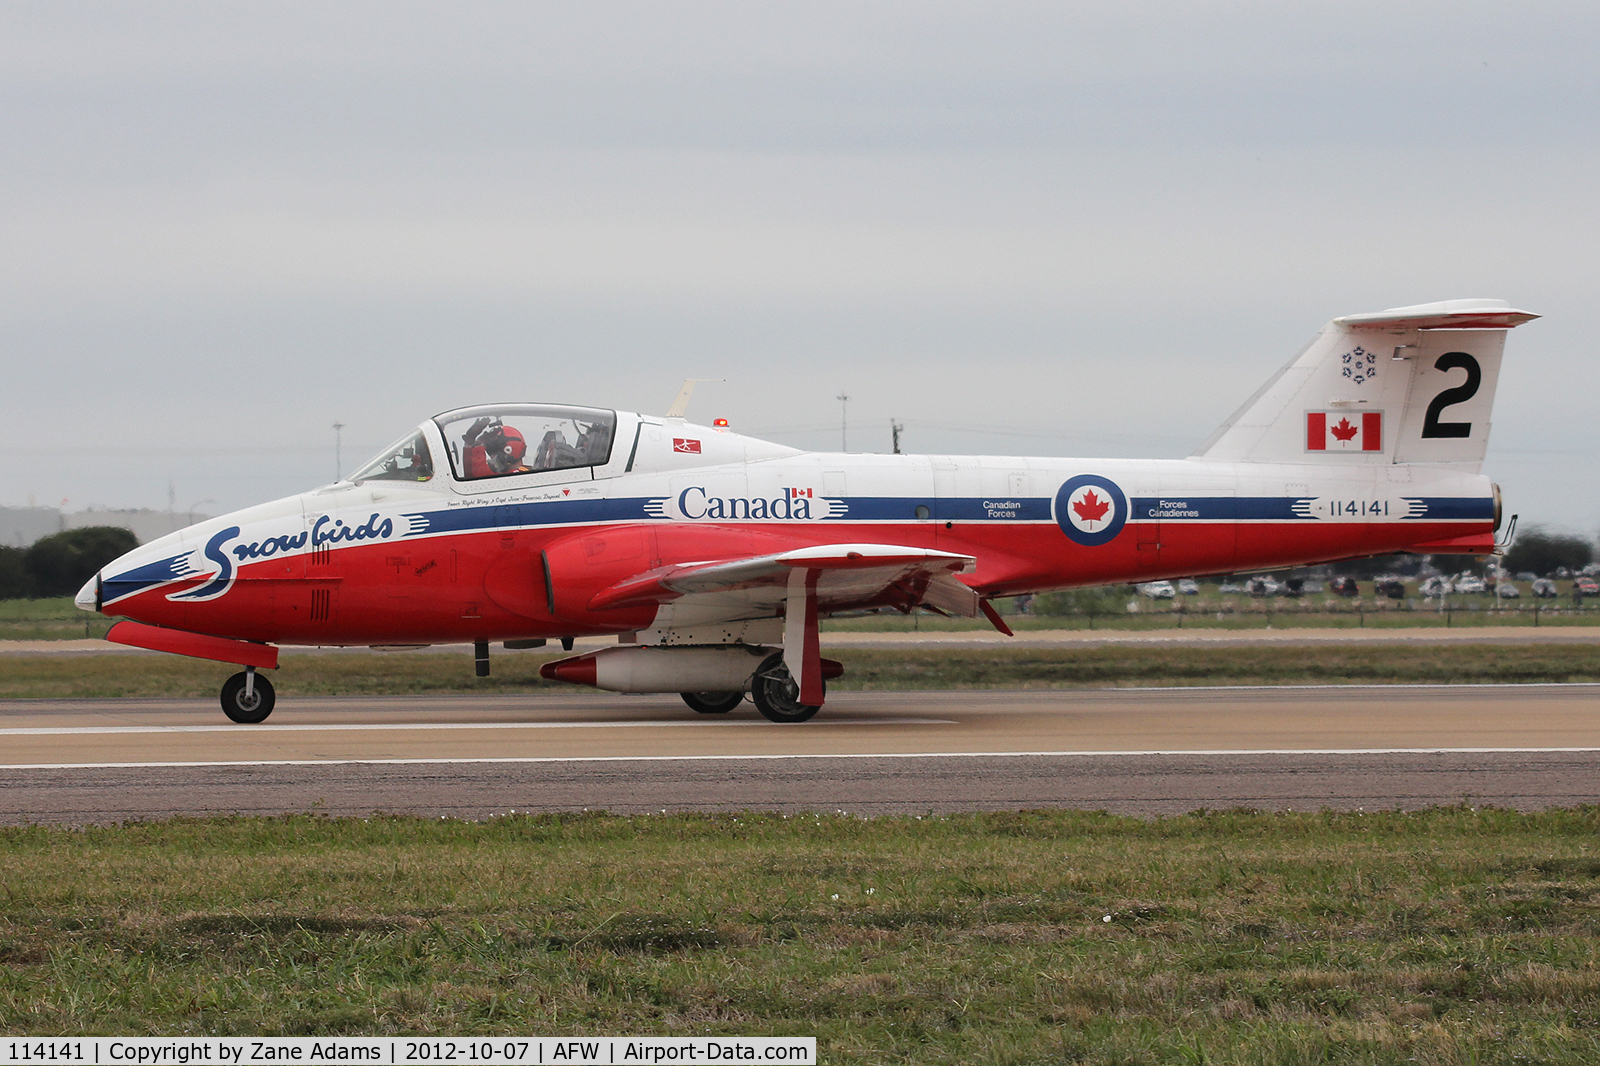 114141, Canadair CT-114 Tutor C/N 26141, At the 2012 Alliance Airshow - Fort Worth, TX